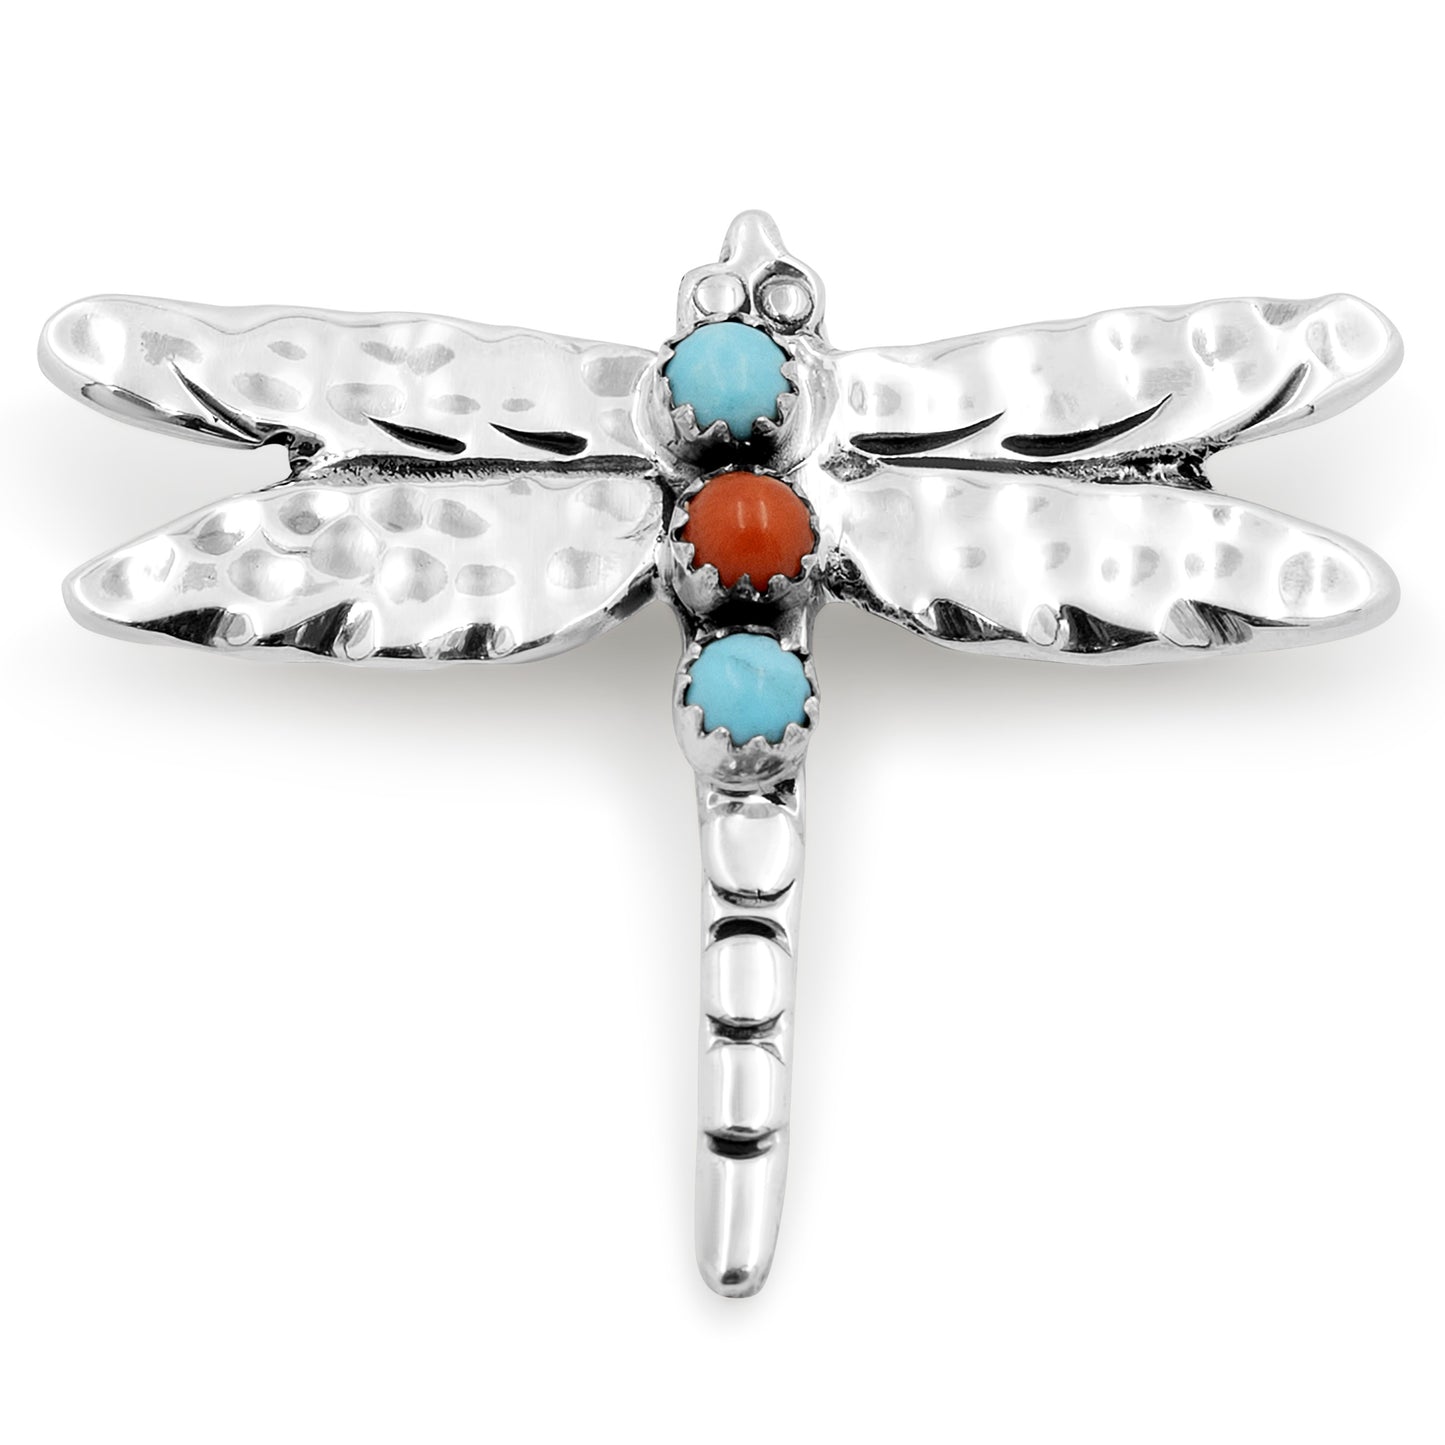 Sterling Silver, Turquoise, & Coral Dragonfly Pin & Pendant